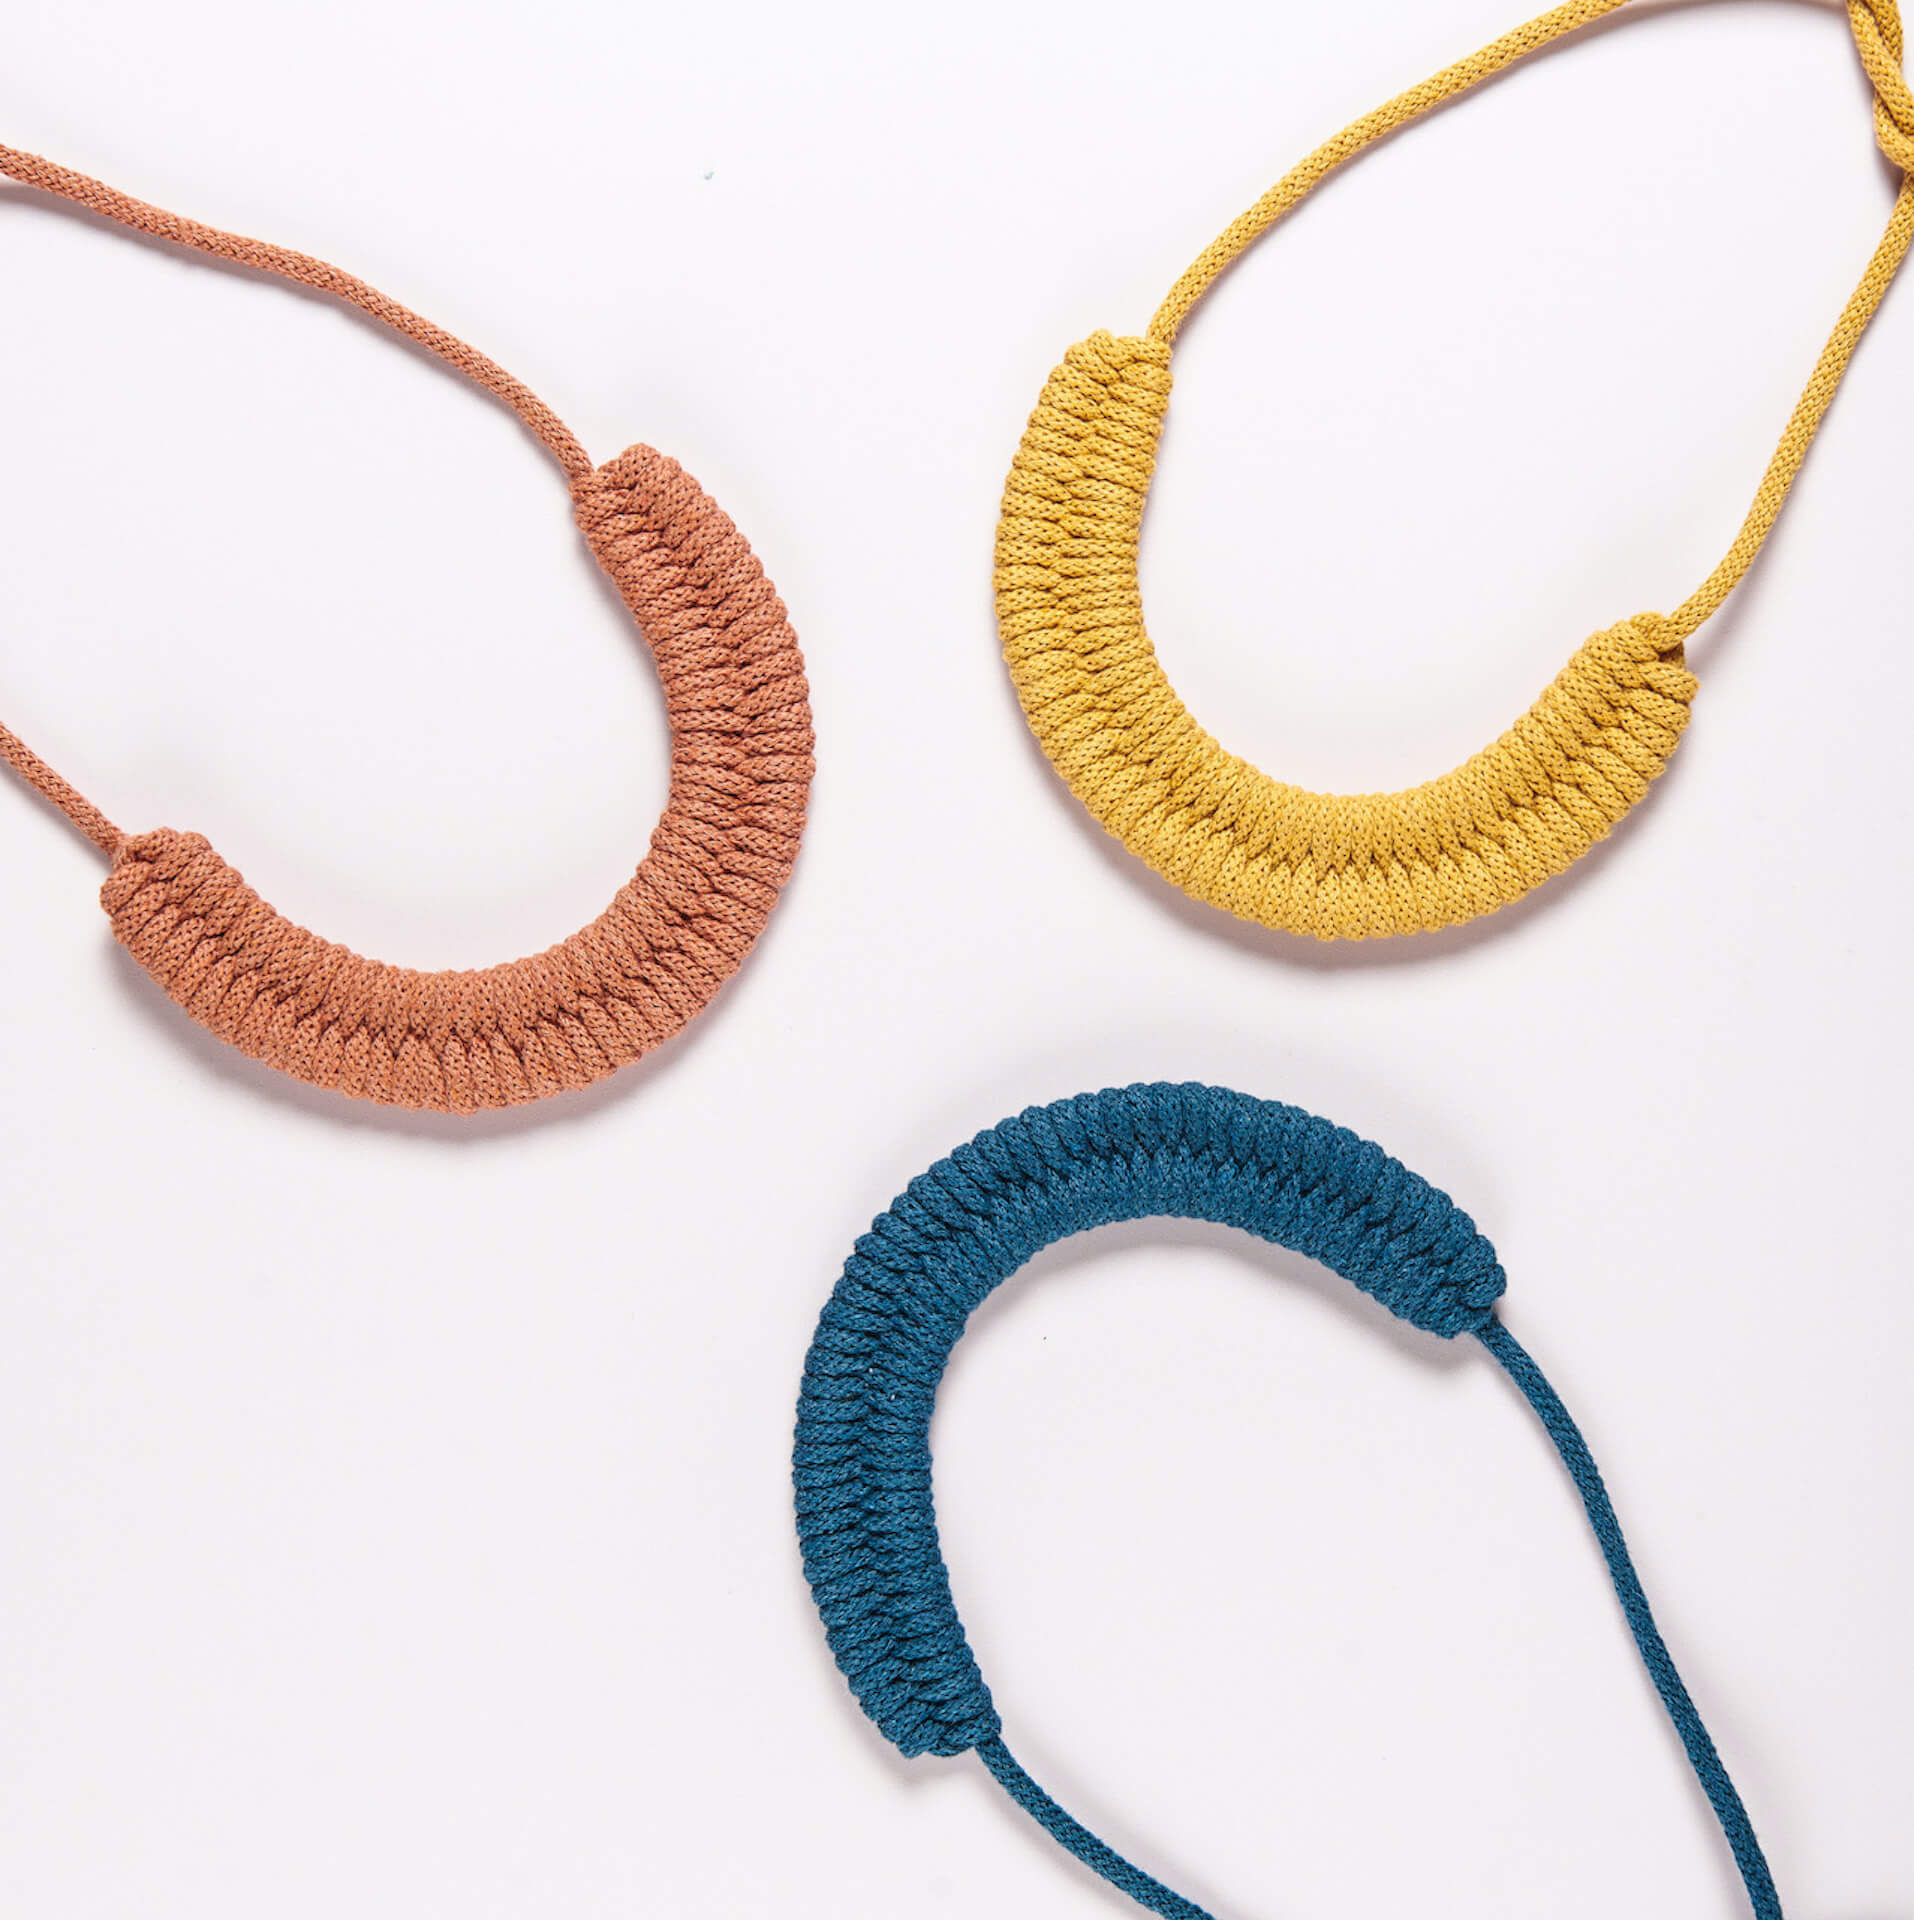 Woven Necklace Kit